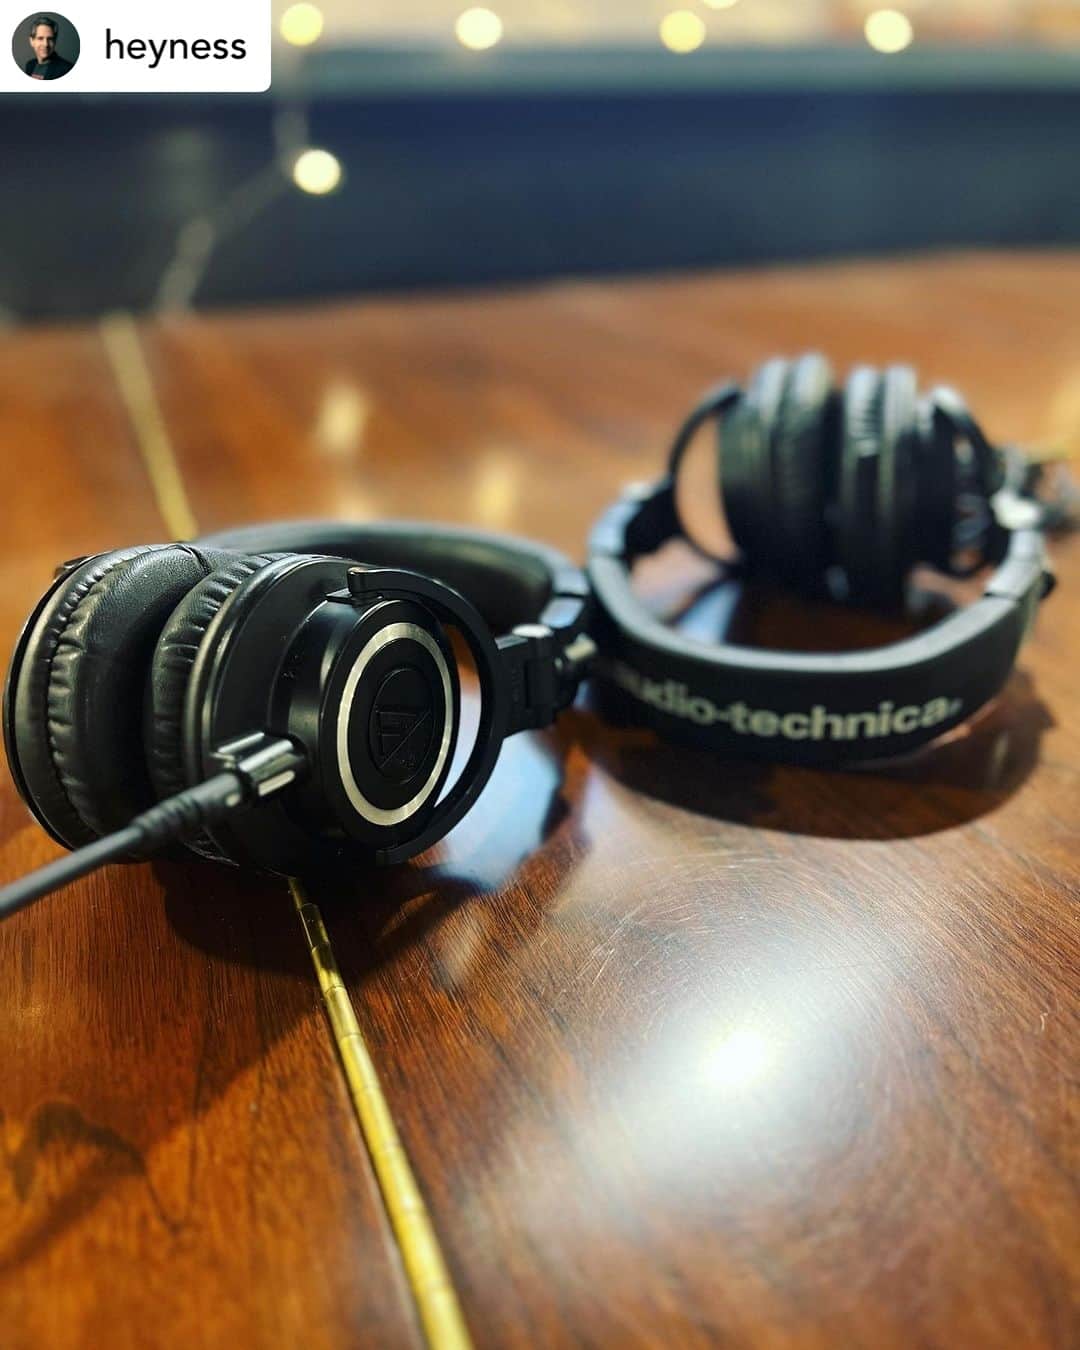 Audio-Technica USAのインスタグラム：「#FanPhotoFriday: “These workhouse ATH-M50x headphones are my absolute favorite for recording. They have great isolation and are consistently reliable.” We couldn’t agree more. Thanks for sharing our headphones, @heyness! ⁠ .⁠ .⁠ .⁠ #AudioTechnica #Headphones #ATHM50x #StudioHeadphones #Recording」